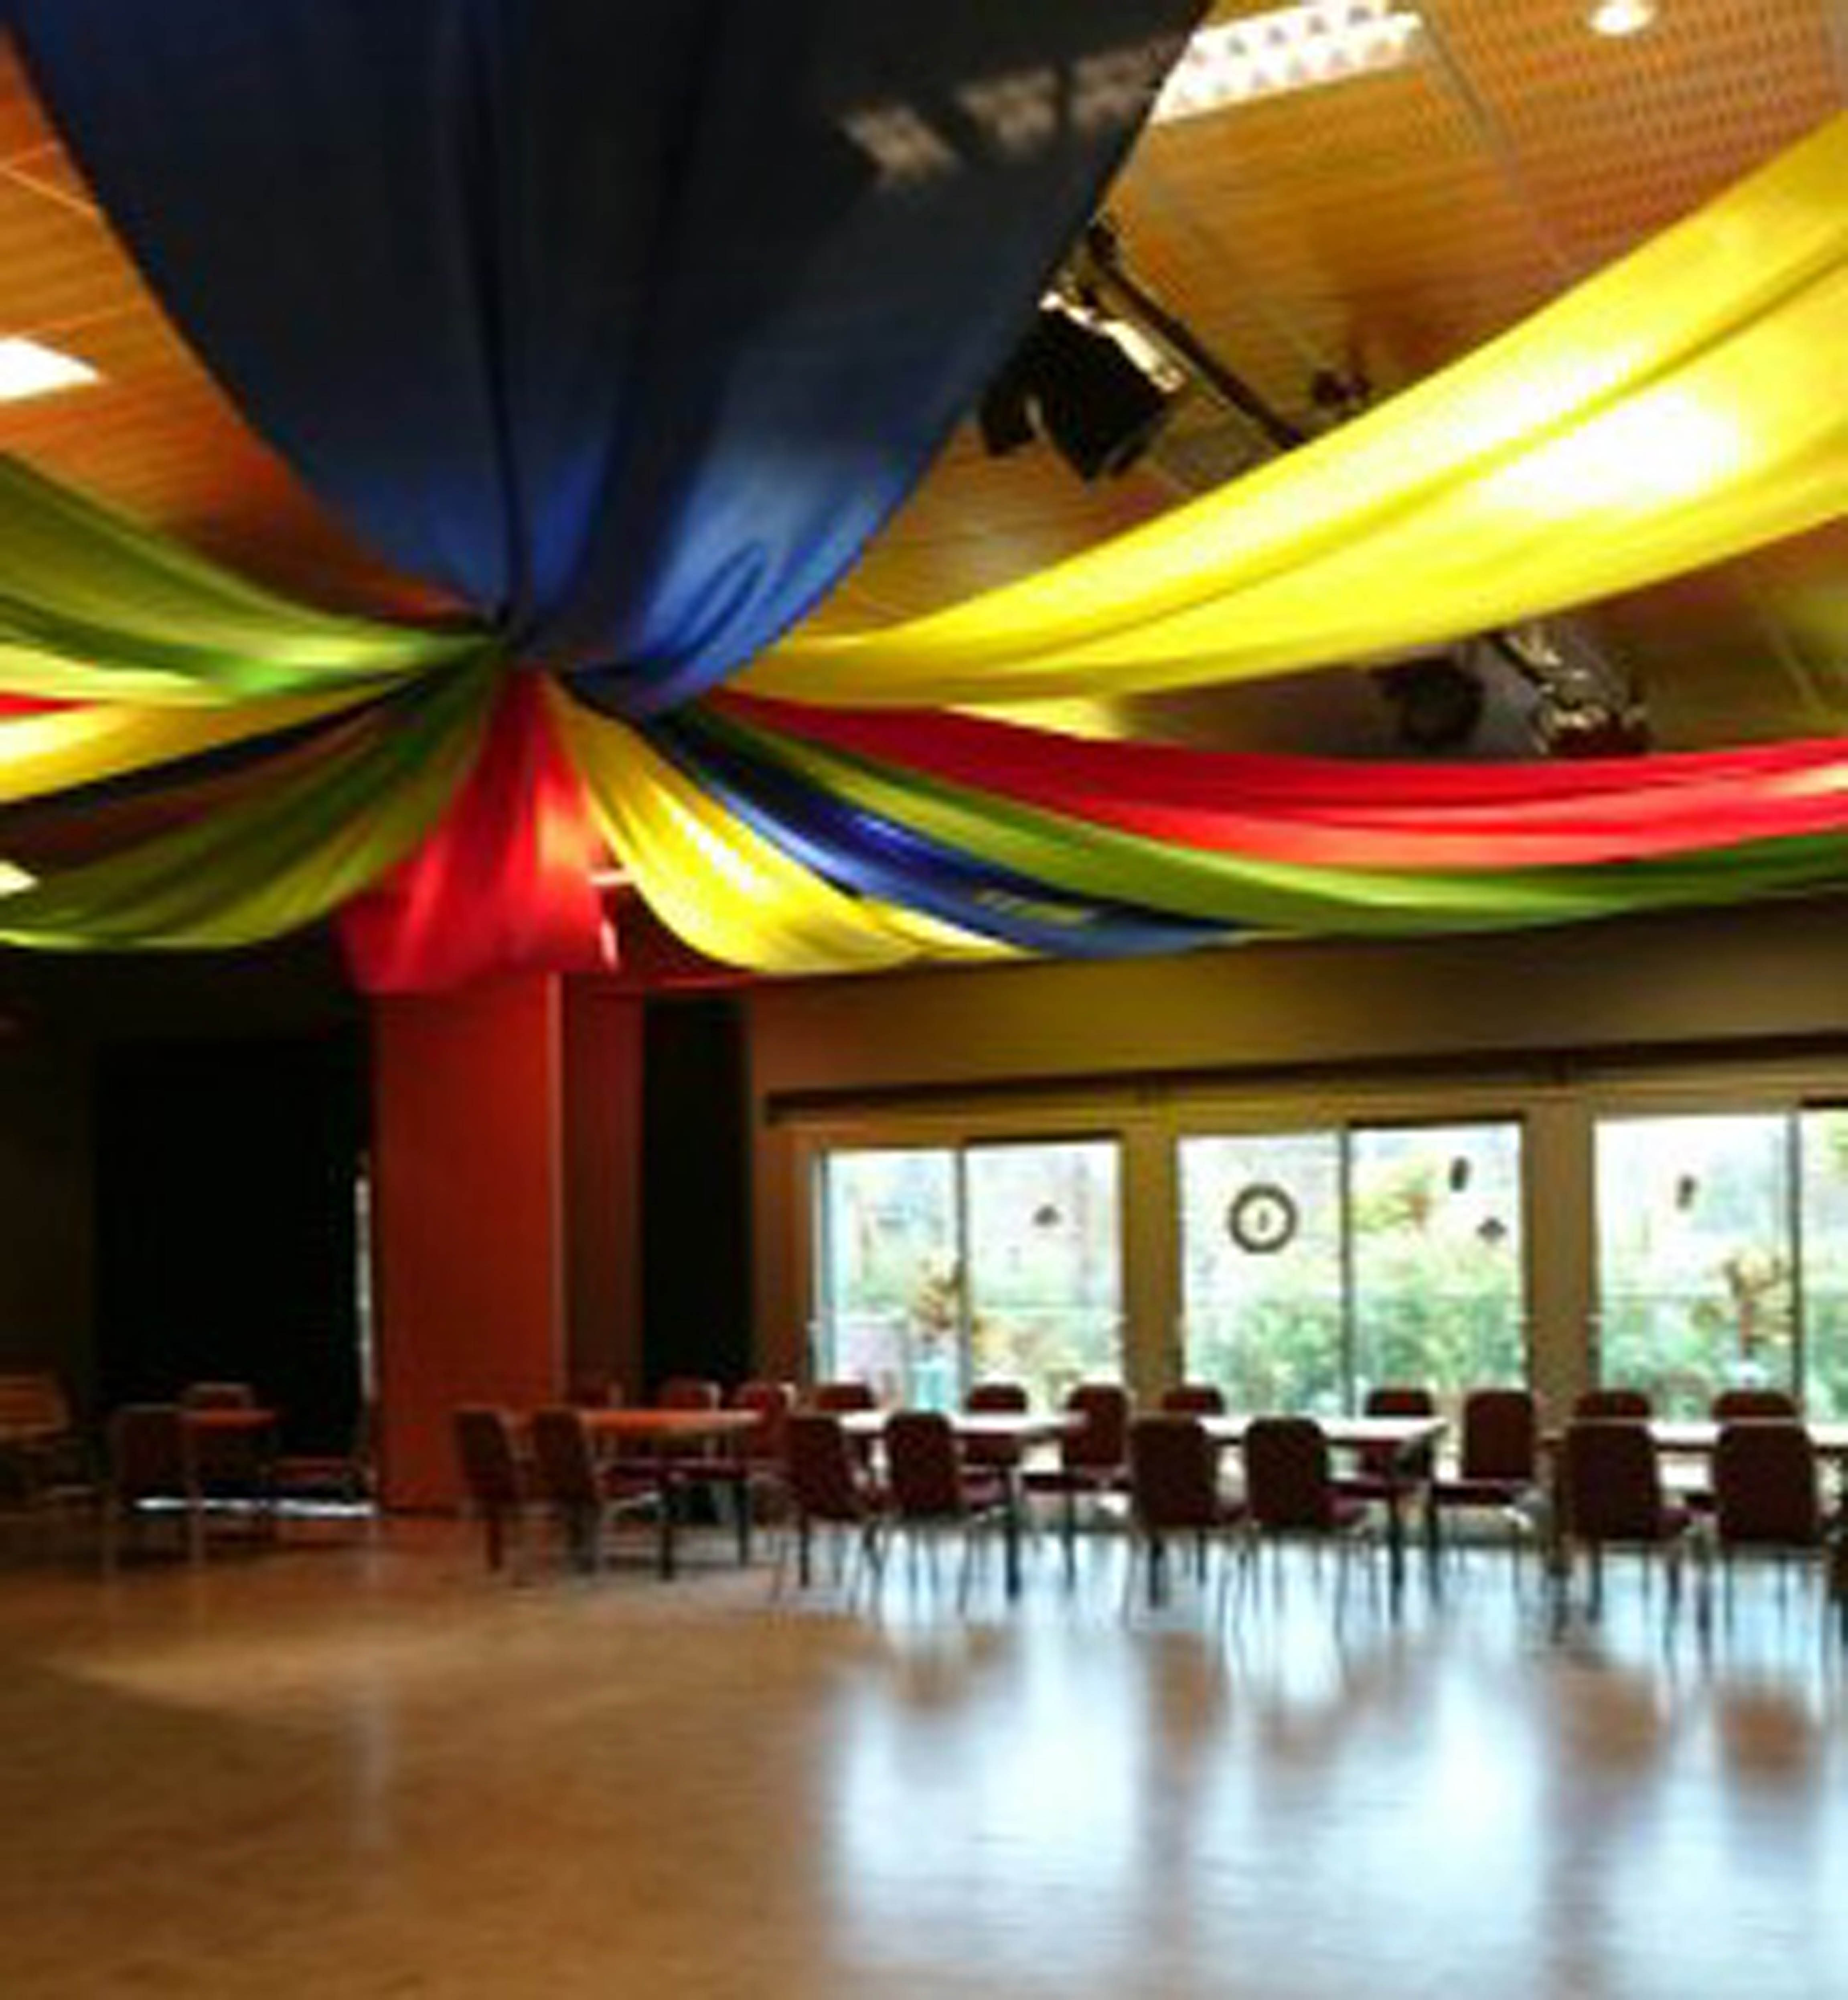 feest-grote-zaal